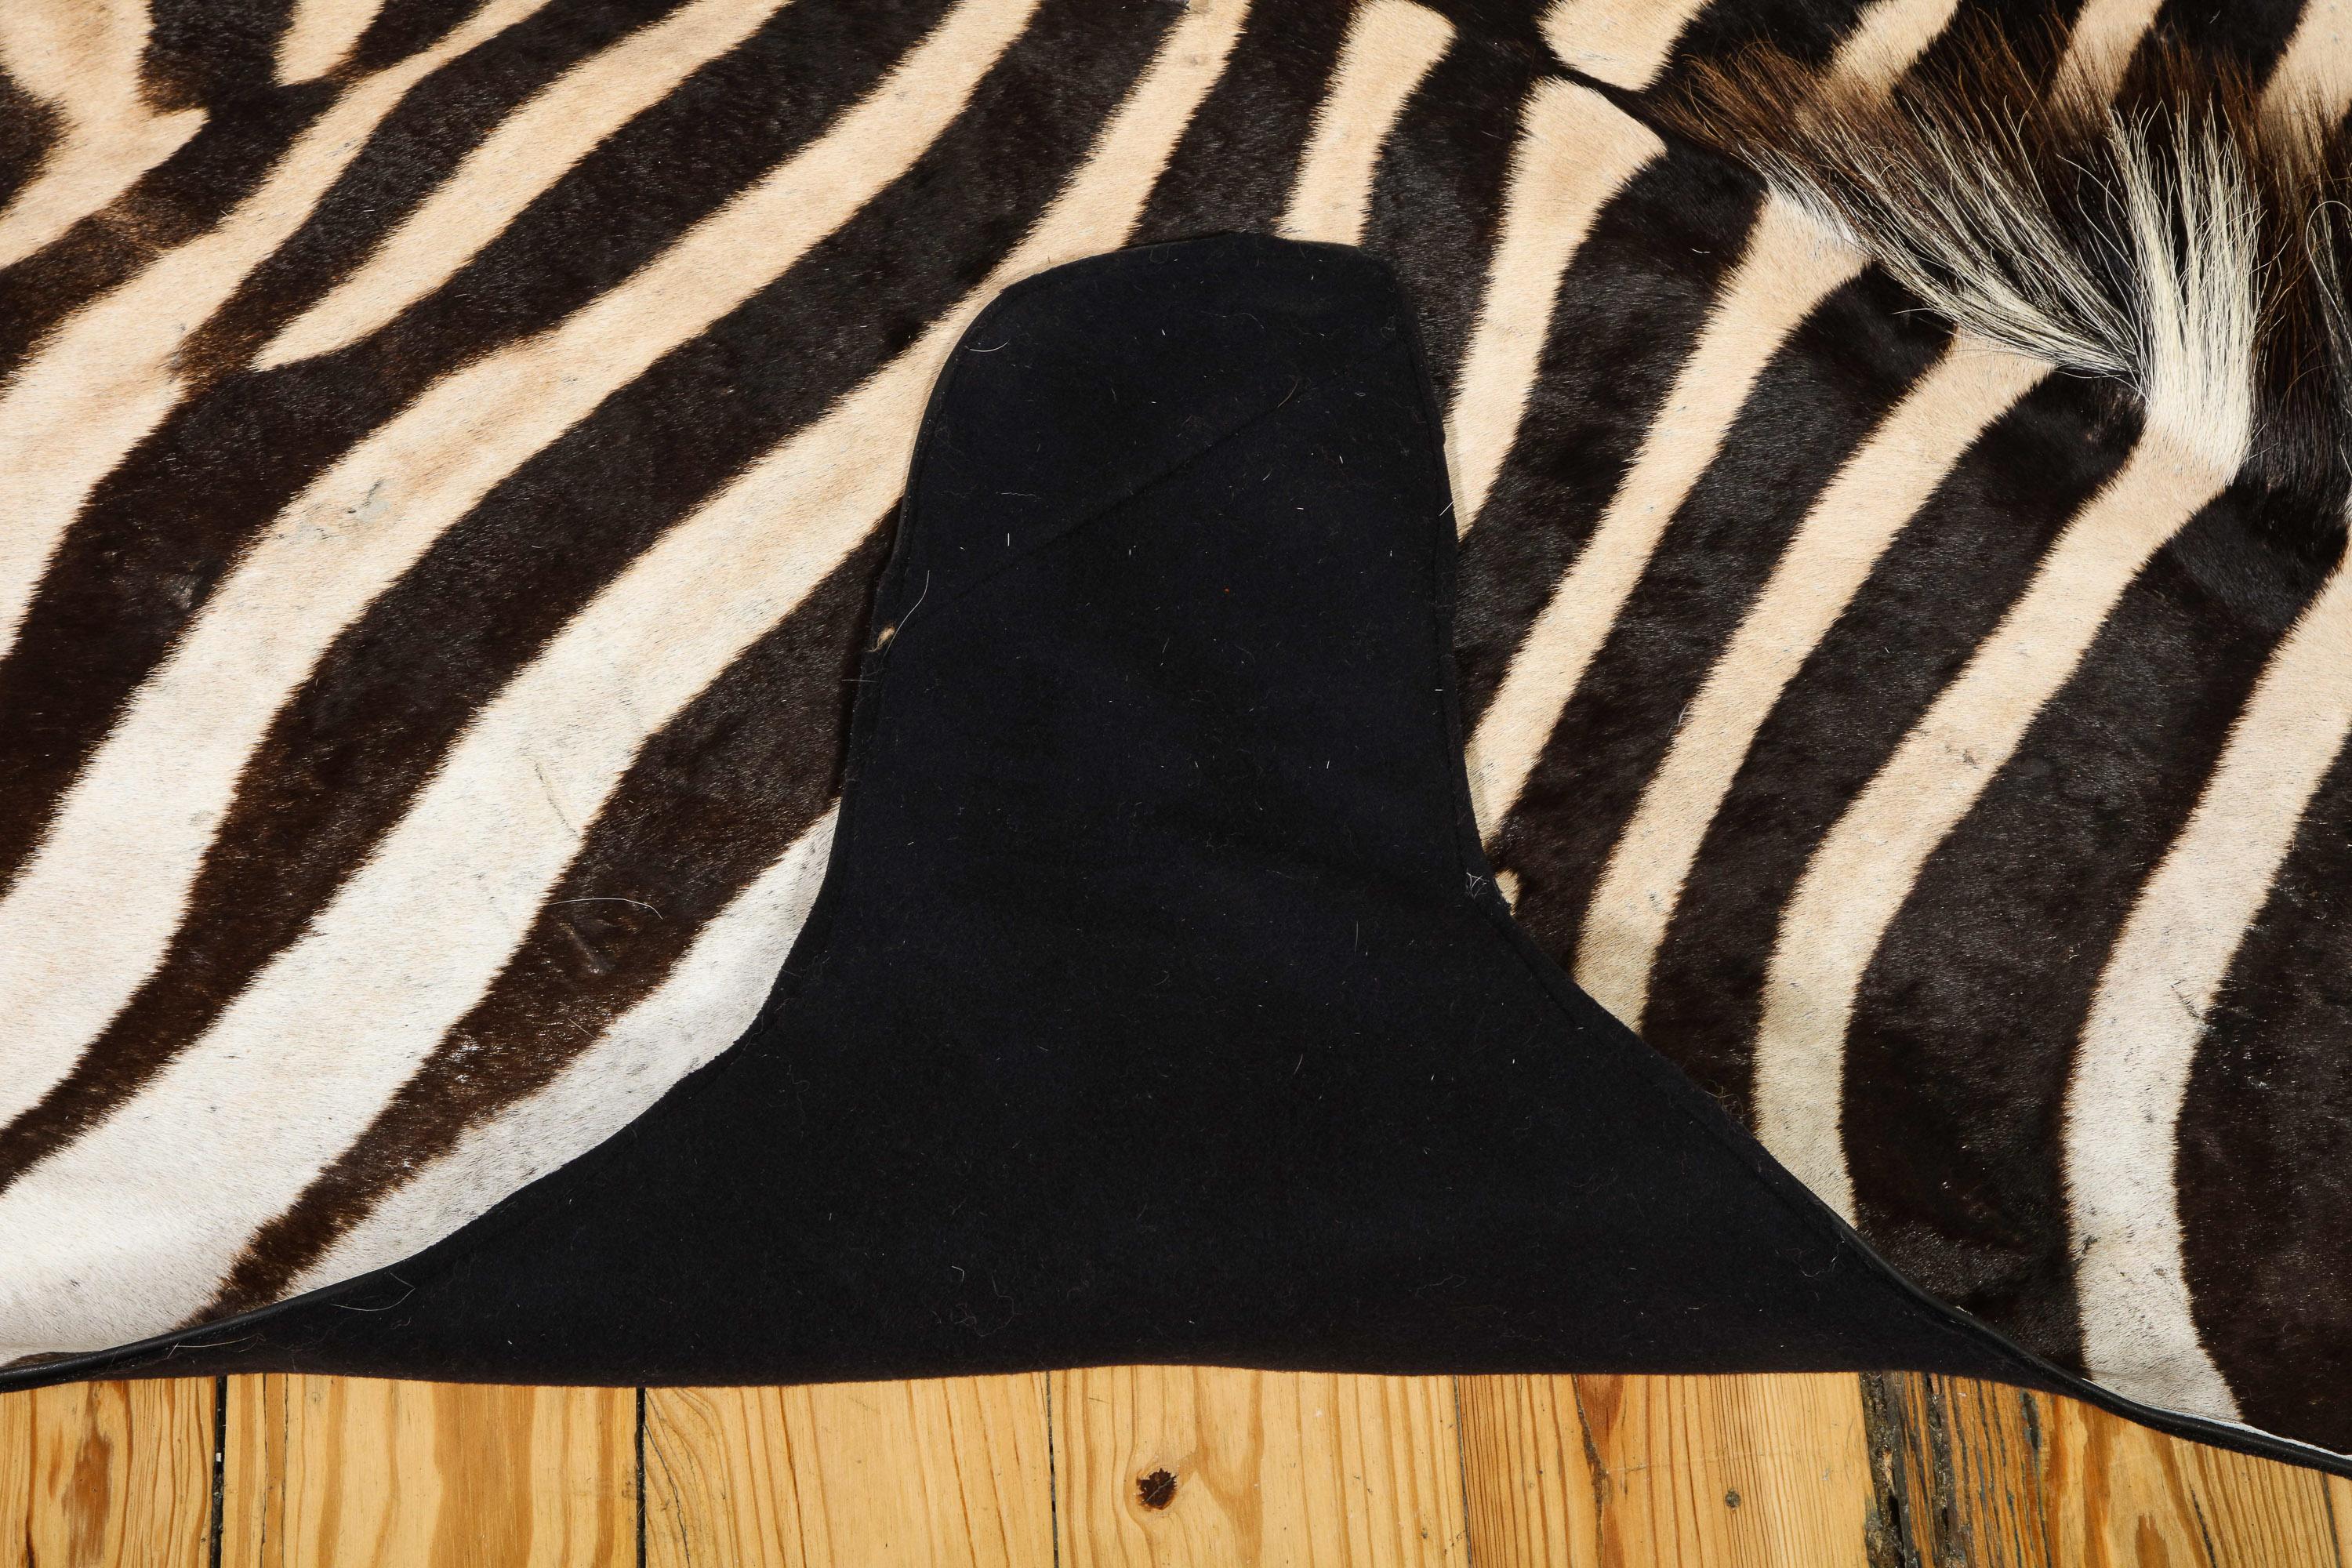 Hand-Crafted Zebra Rug, South Africa, Wool Felt Backed with Leather Trim, In Stock, New Hide For Sale